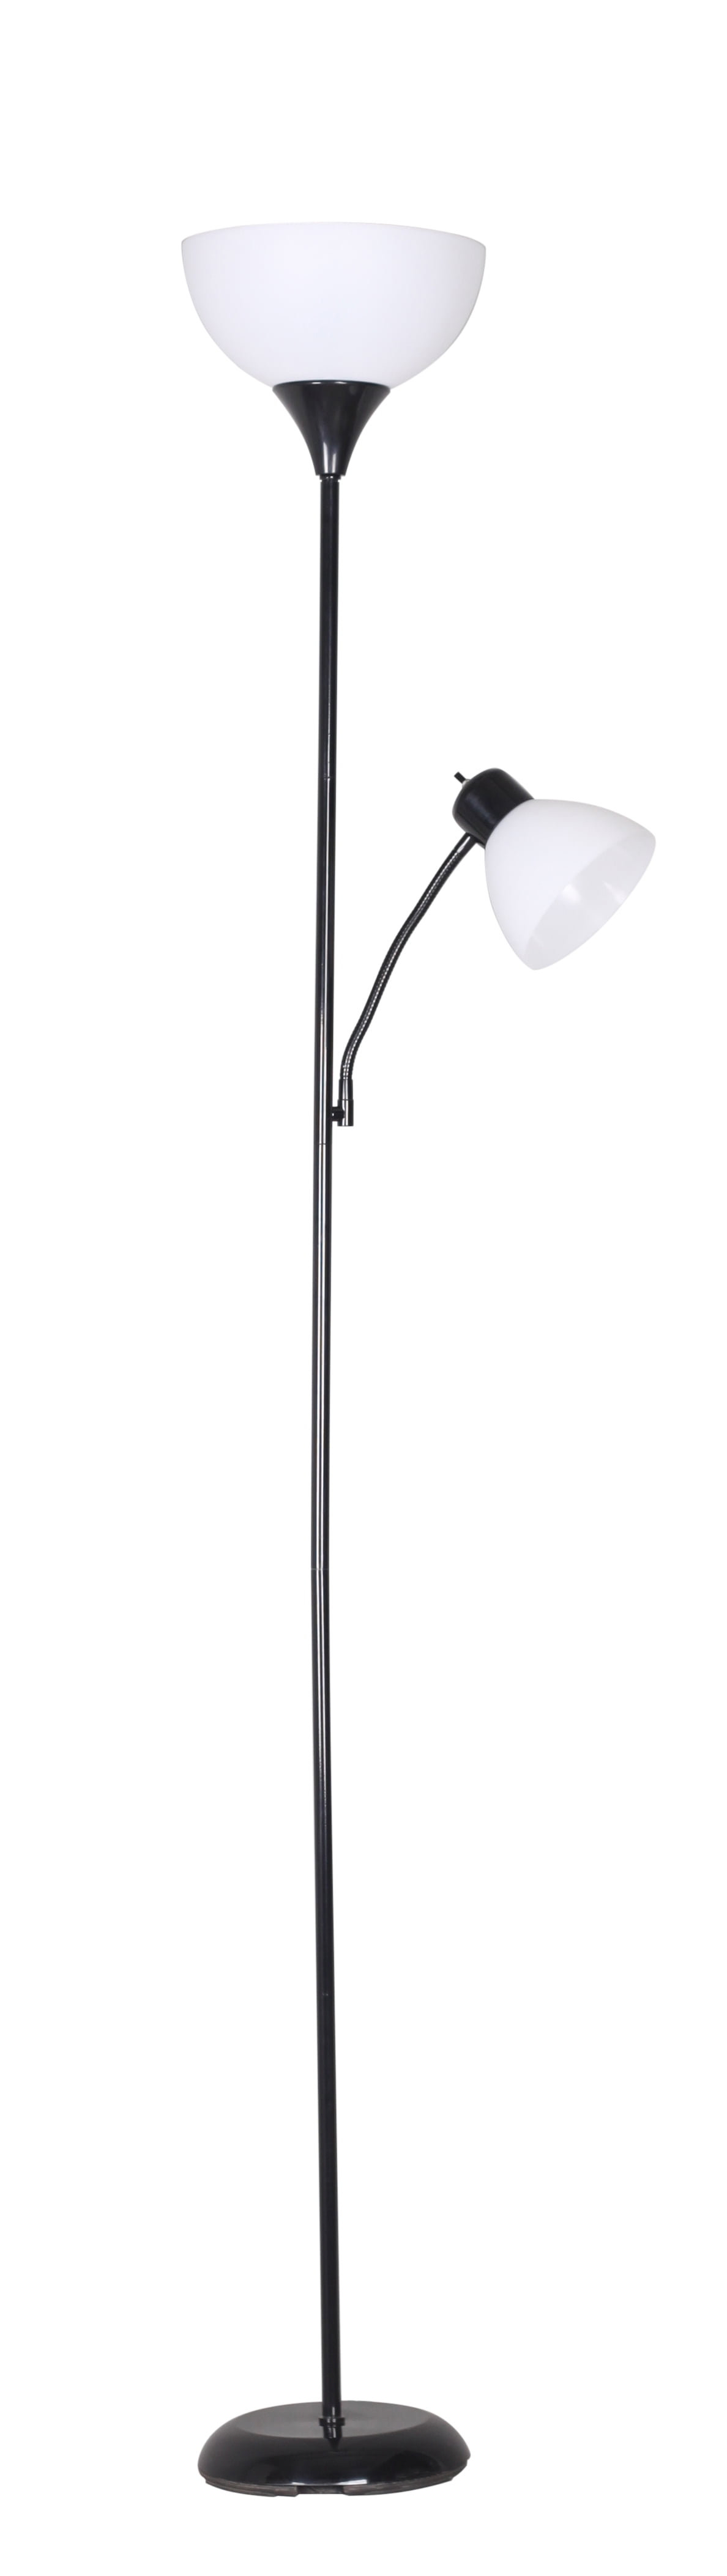 72" Tall Floor Lamp 3-Way Rotary Control Combo Adjustable Reading Home Office 